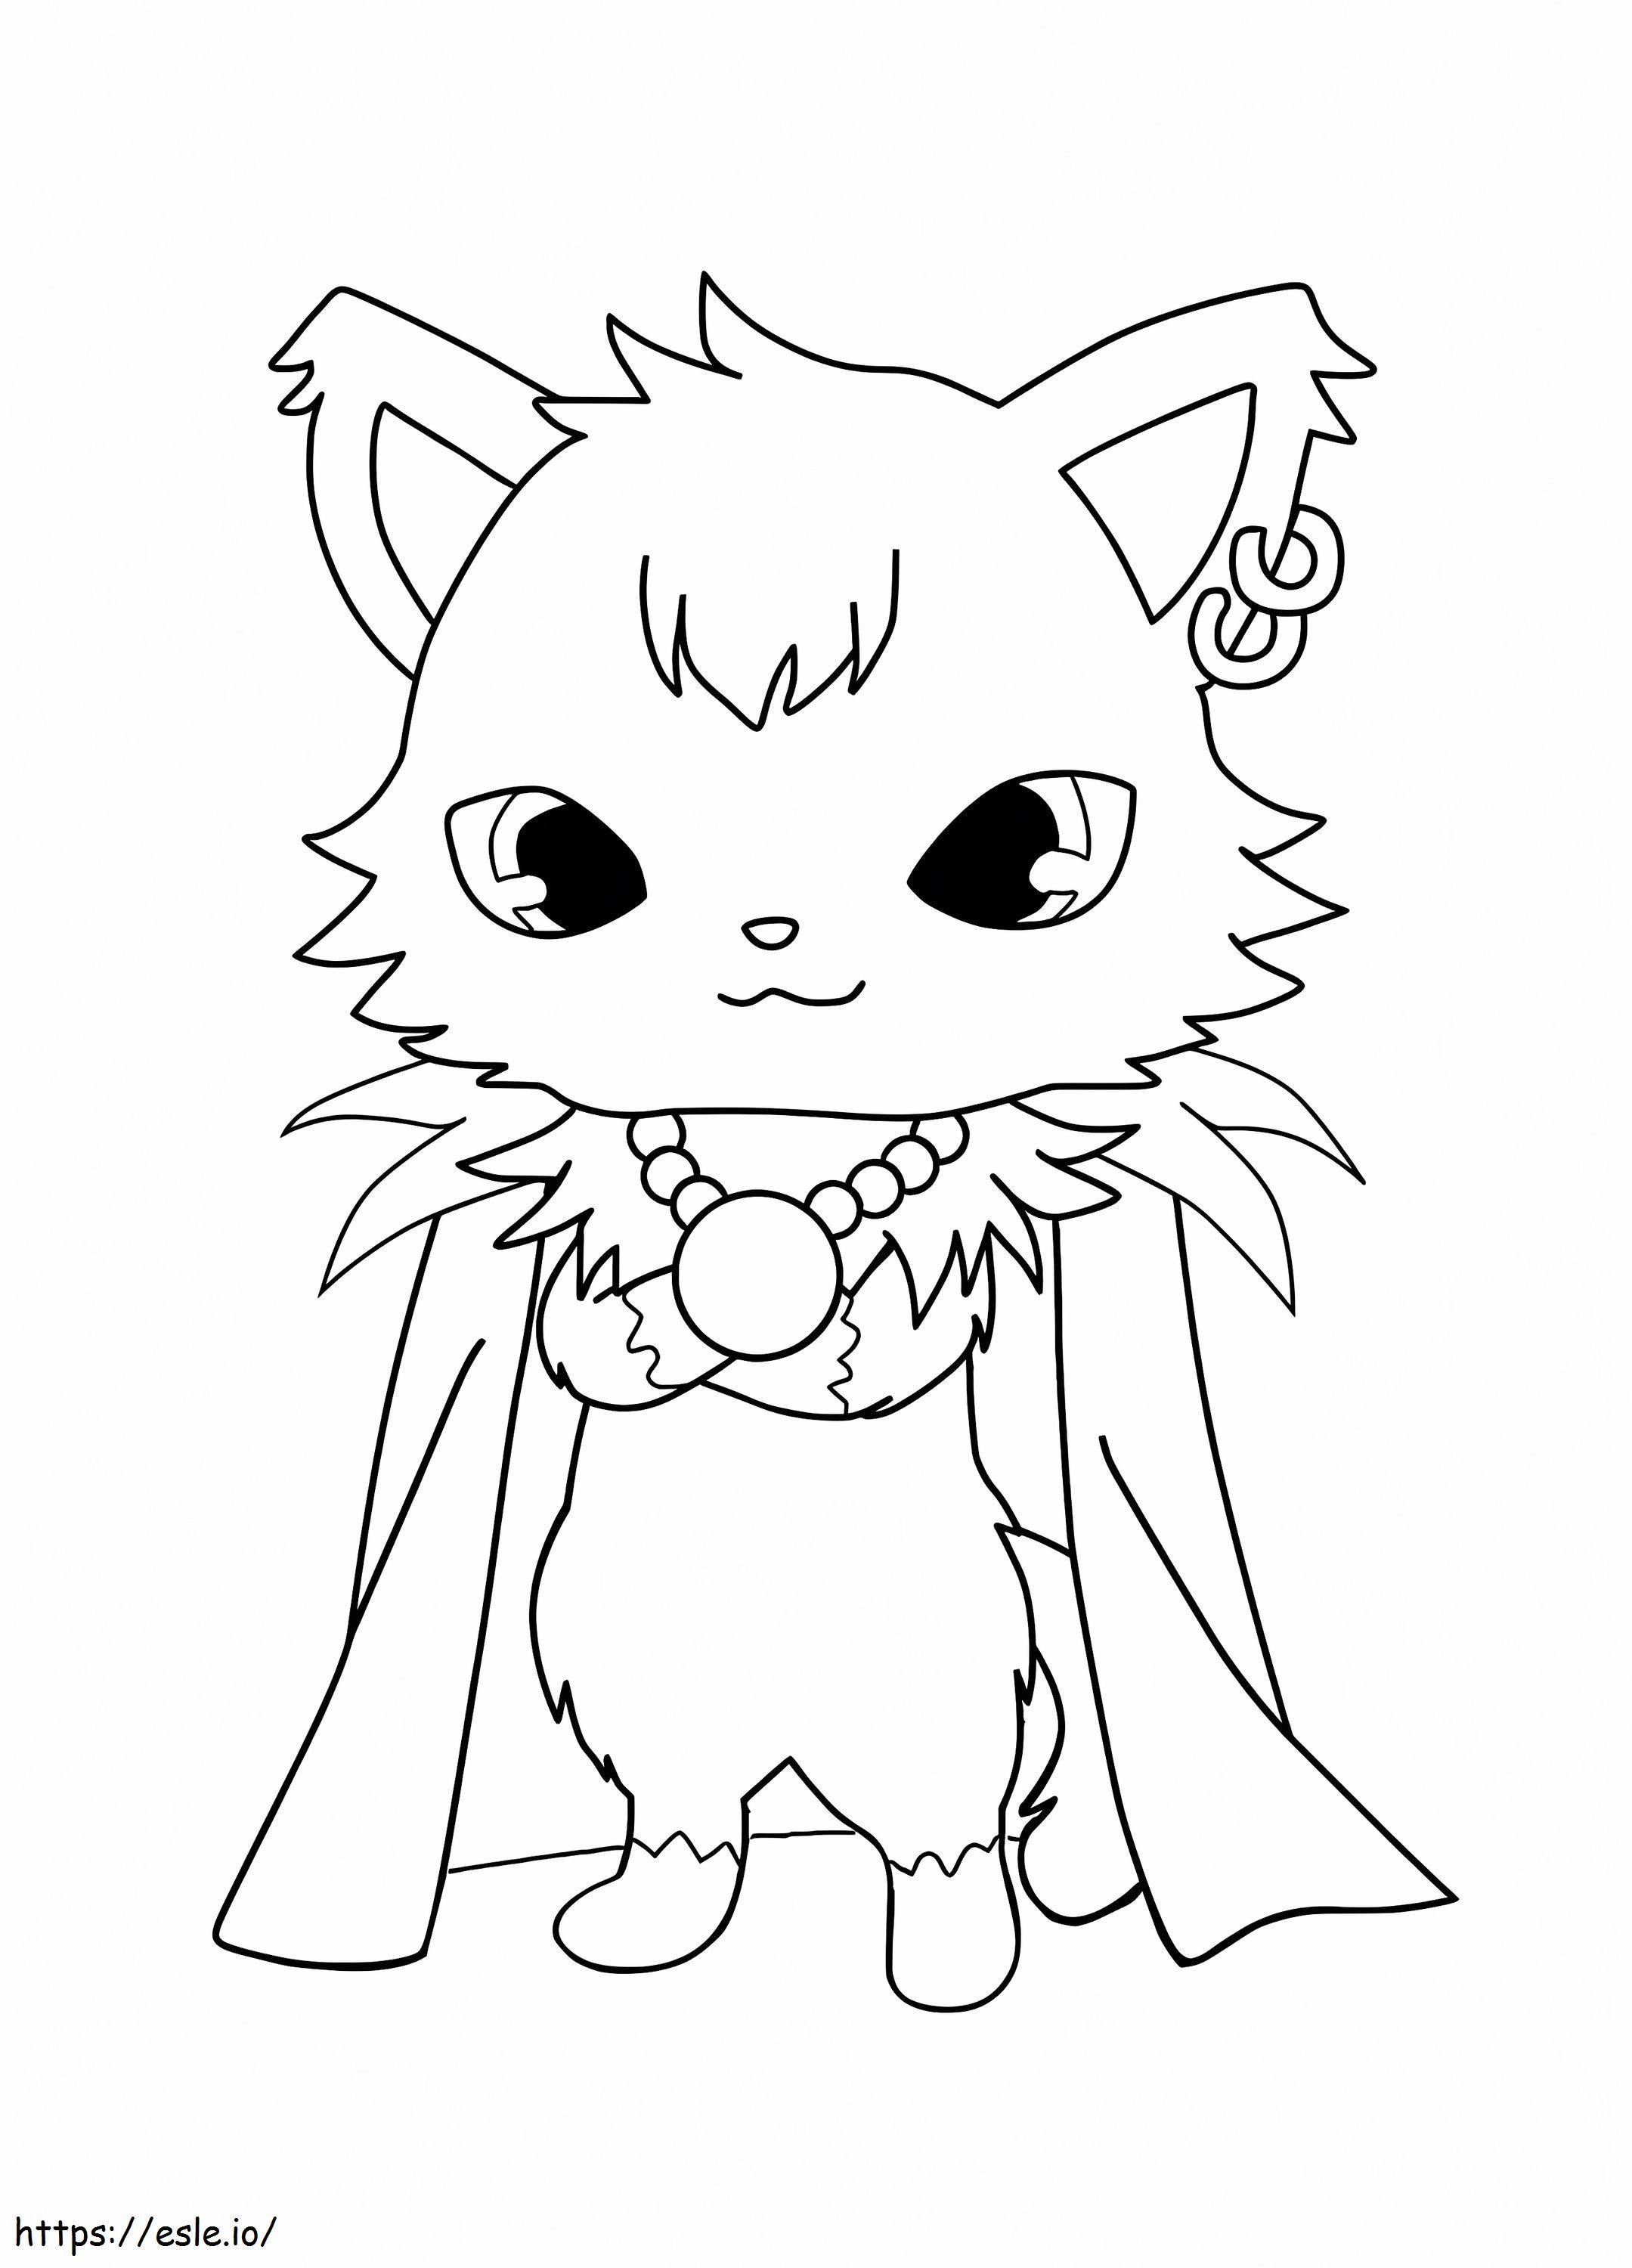 Jewelpets 15 coloring page